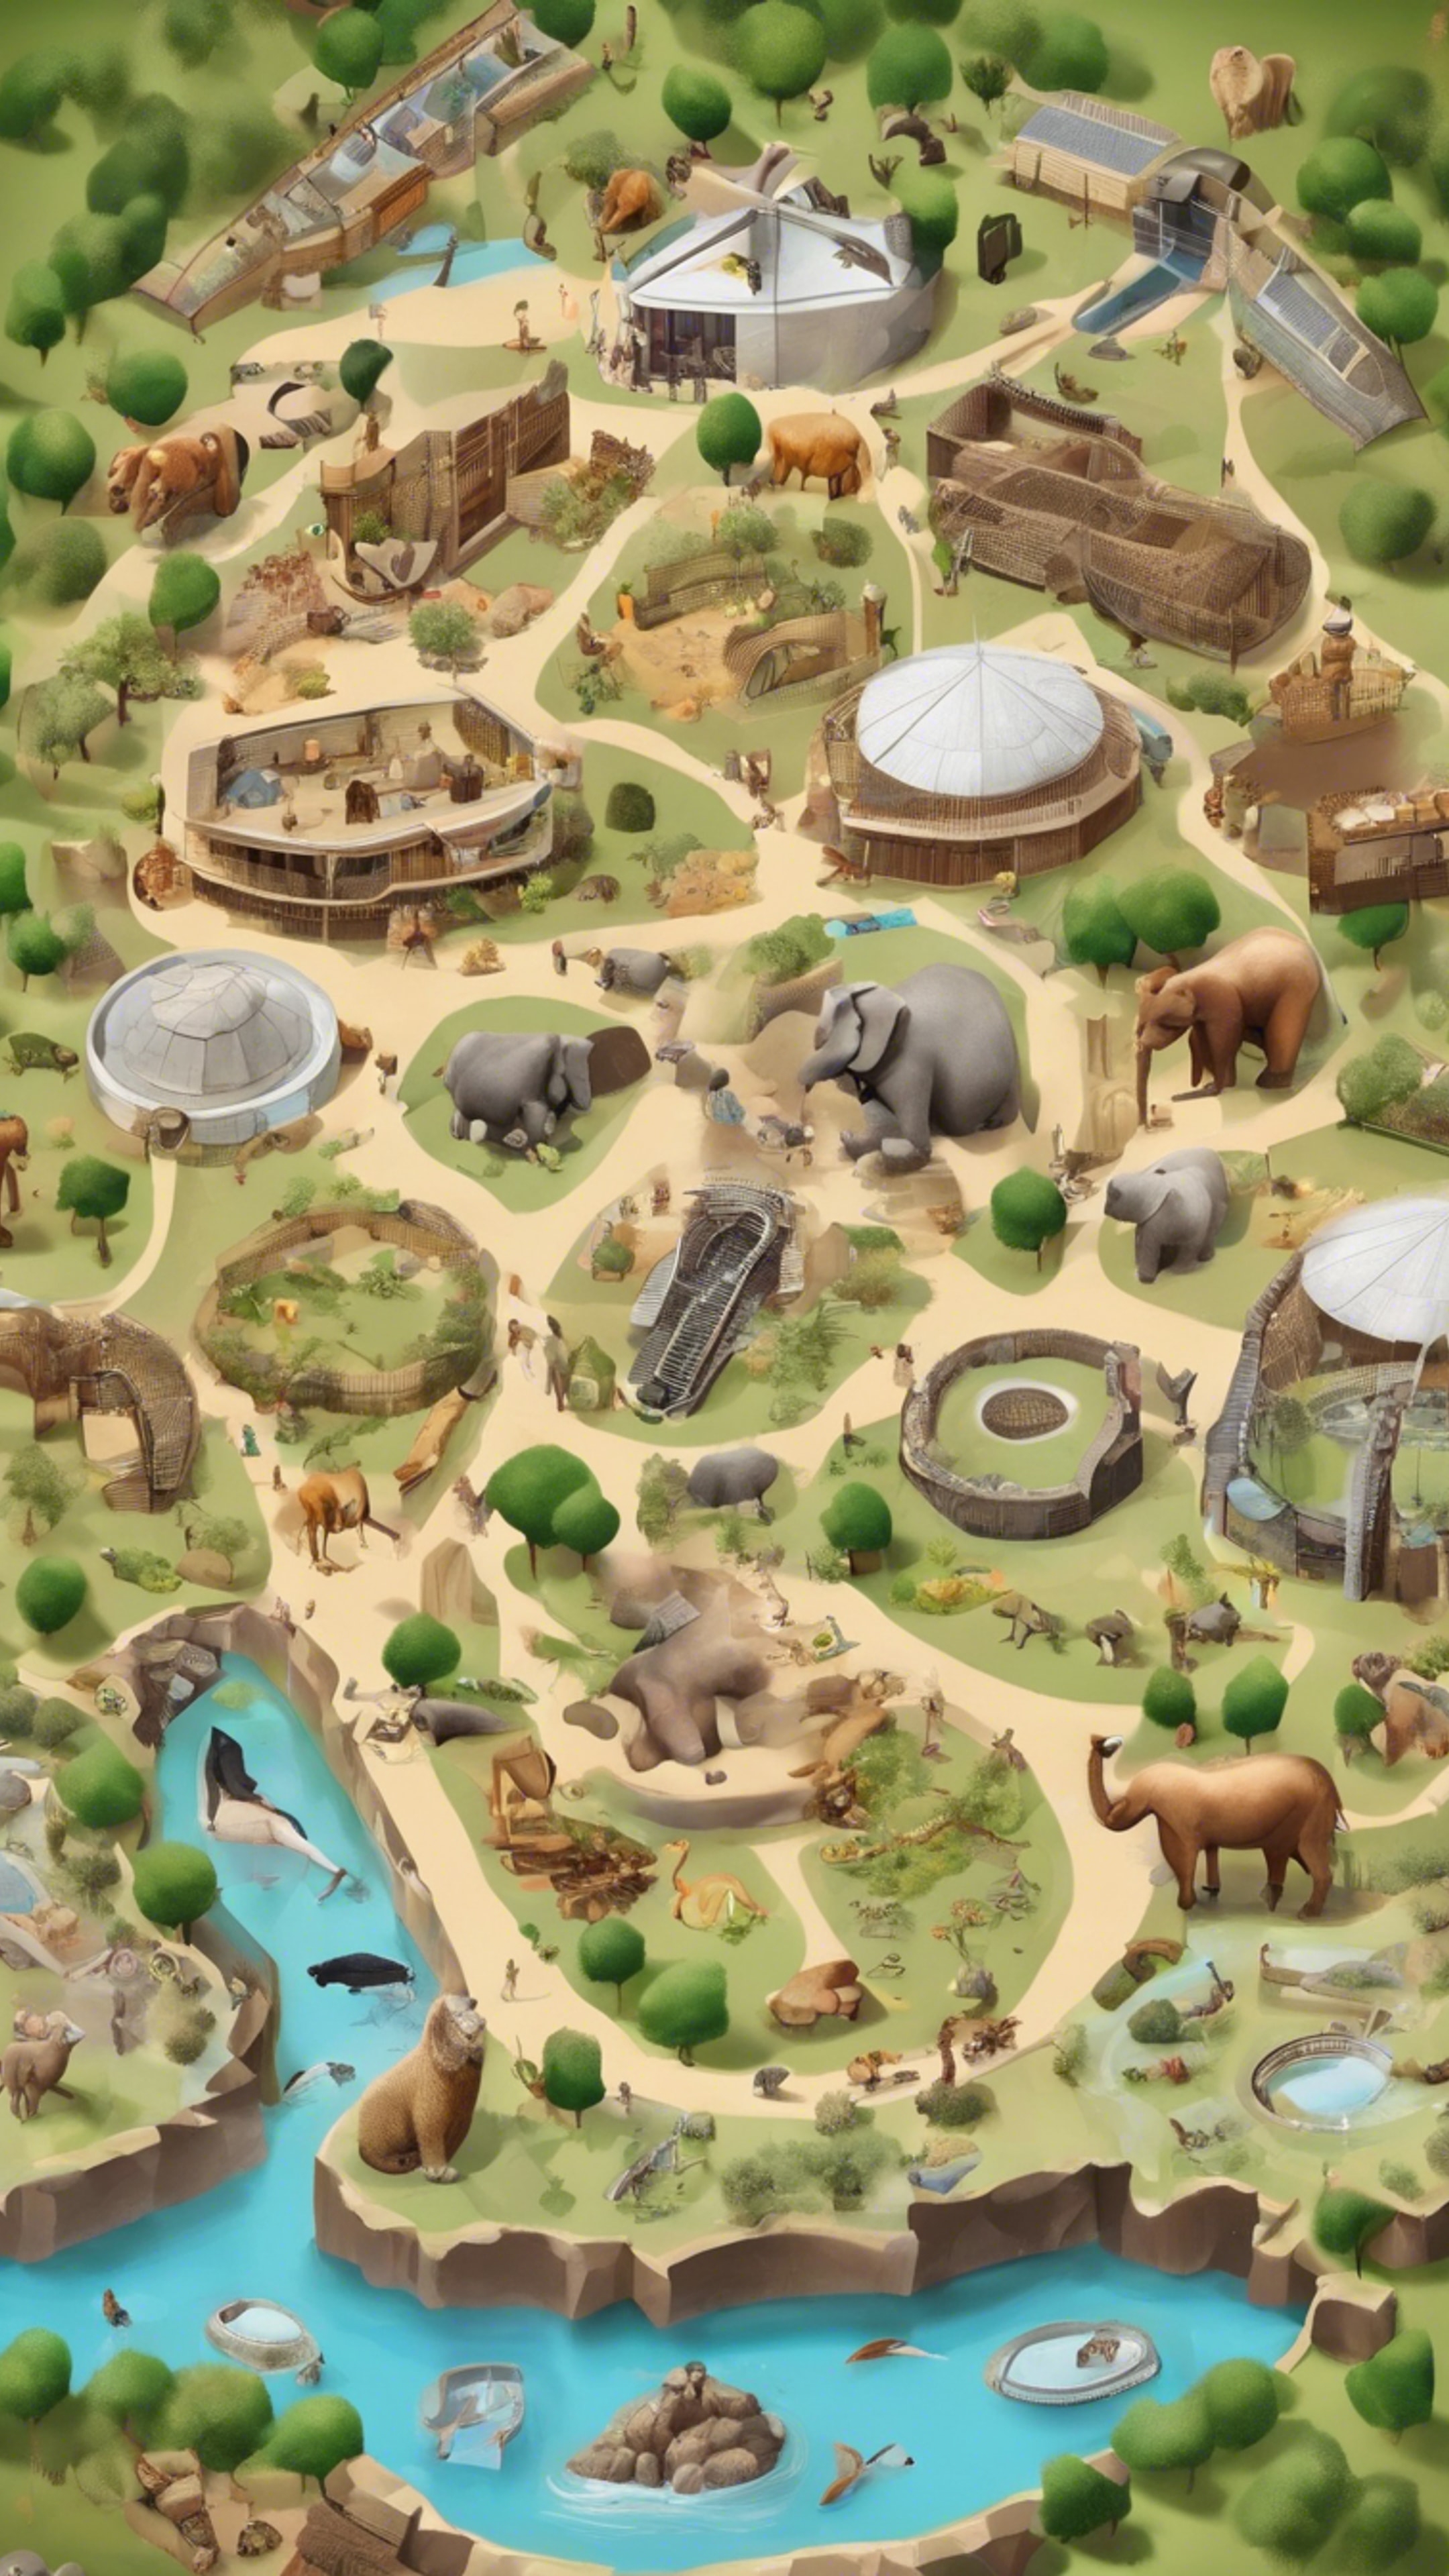 A graphic map of a zoo, with different animal enclosures, food stalls and amenities. Tapeta[7d3ed7eed3f244f7a17f]